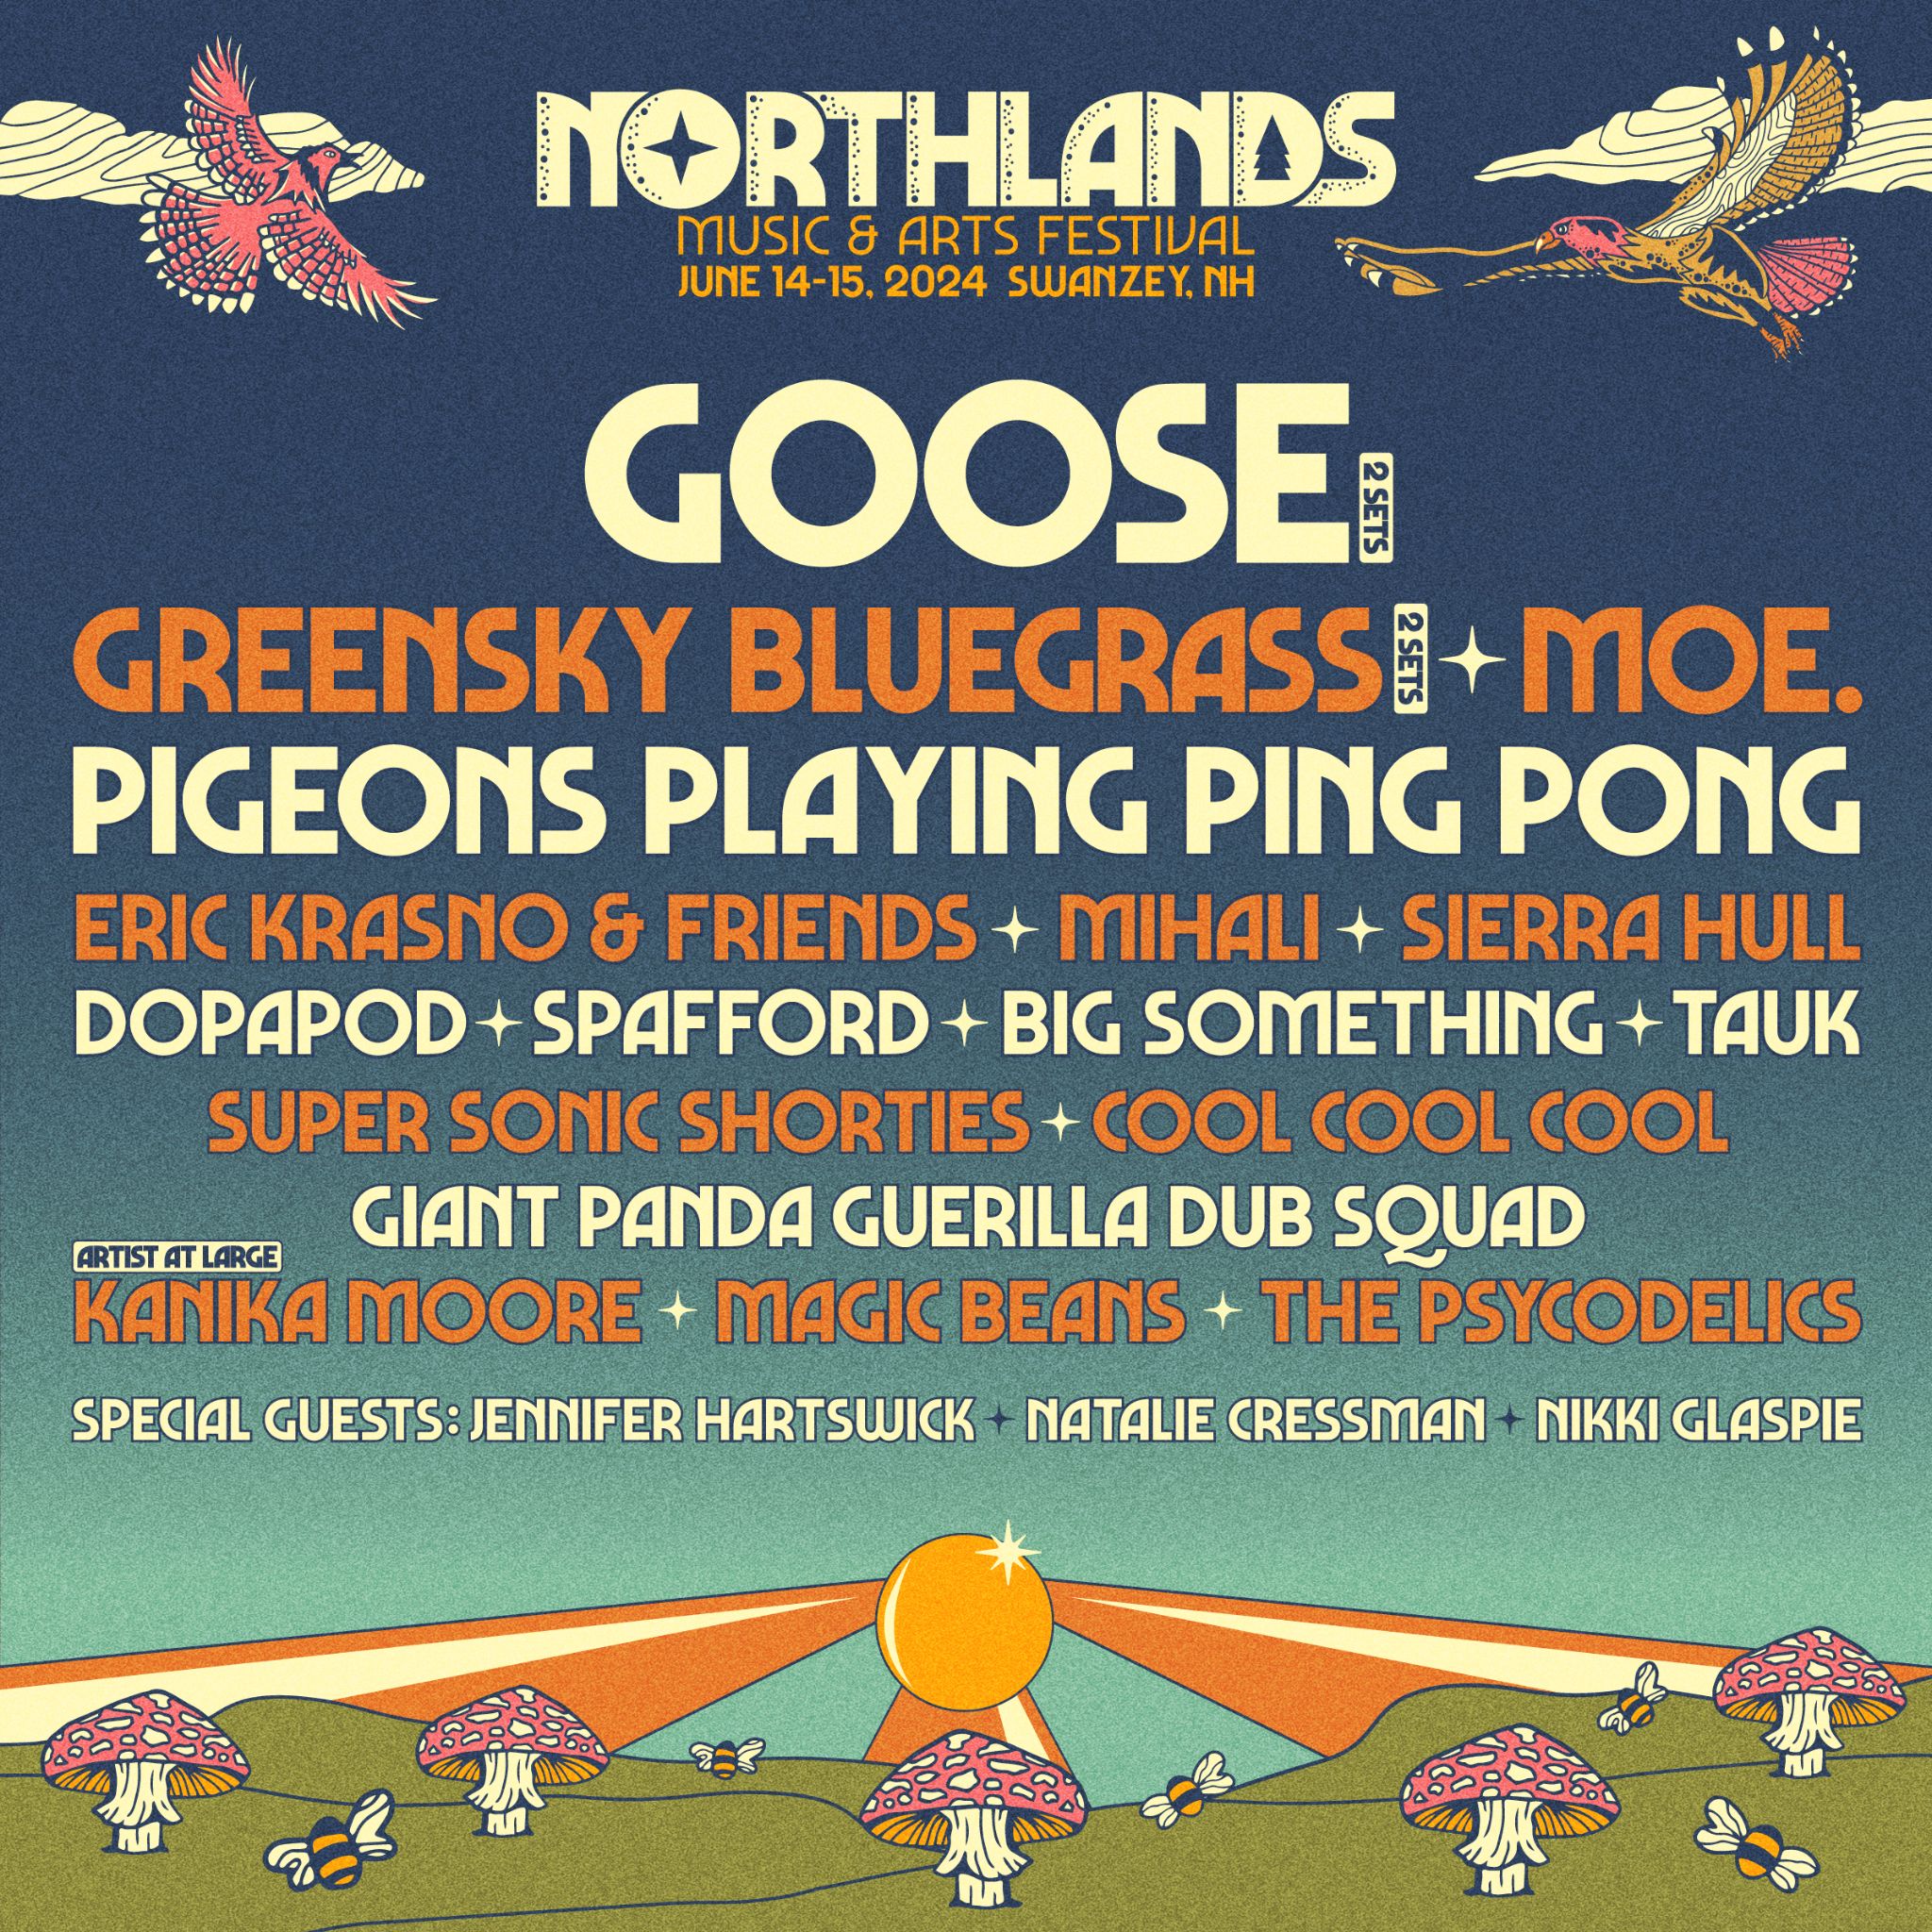 Northlands Music & Arts Festival Adds PPPP, Big Something, and Cool